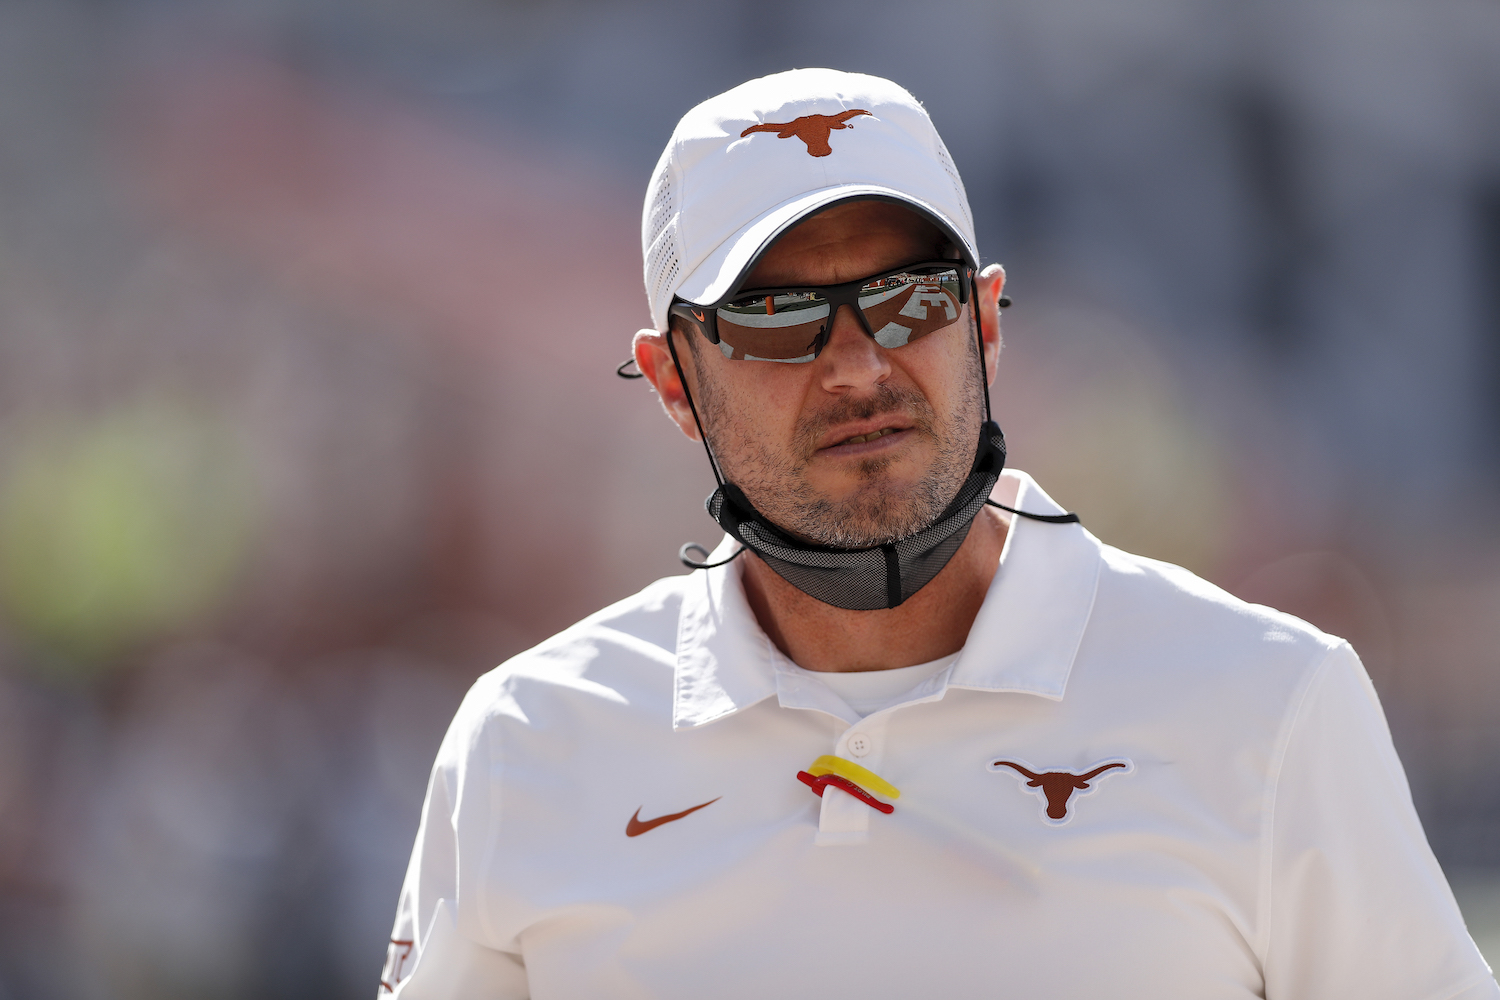 Tom Herman and Texas Longhorns Suffer Brutal Loss of Offensive Leader with Gruesome Injury